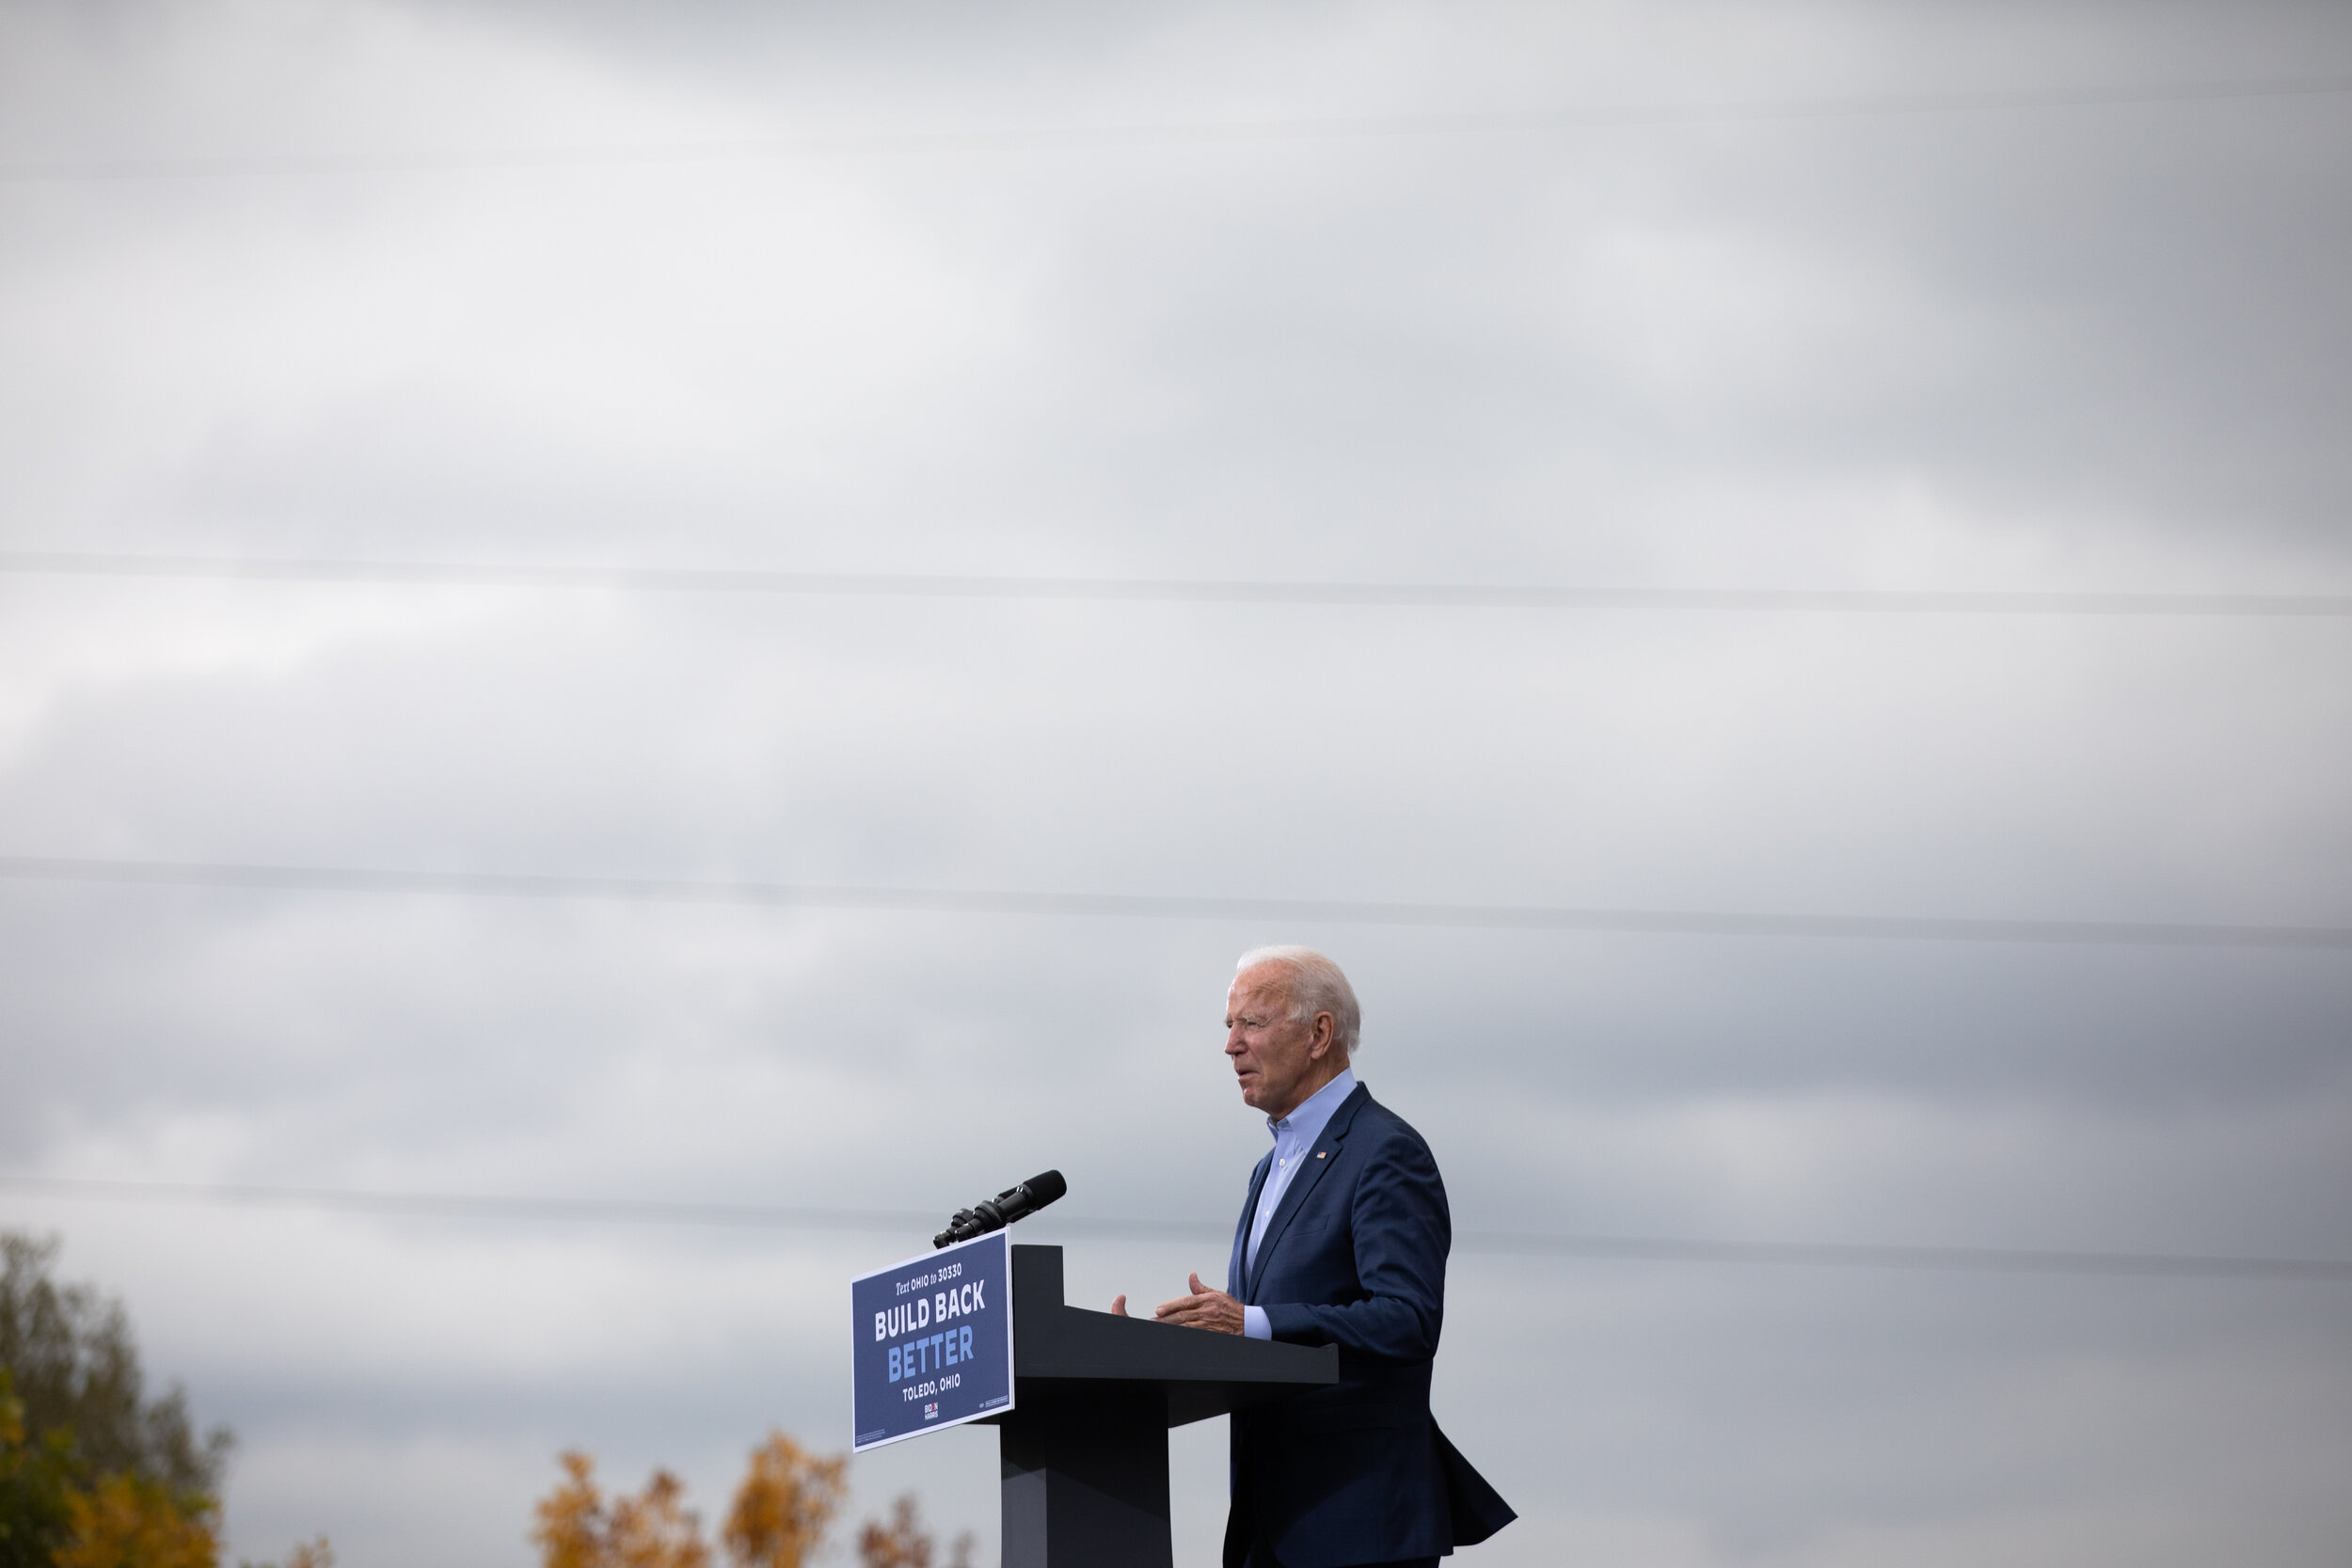  Former Vice President Joe Biden speaks about his “Build Back Better” agenda during a campaign event at UAW Local 14 Hall in Toledo, Ohio, on Monday, October 12, 2020. (Emily Elconin for The New York Times) 